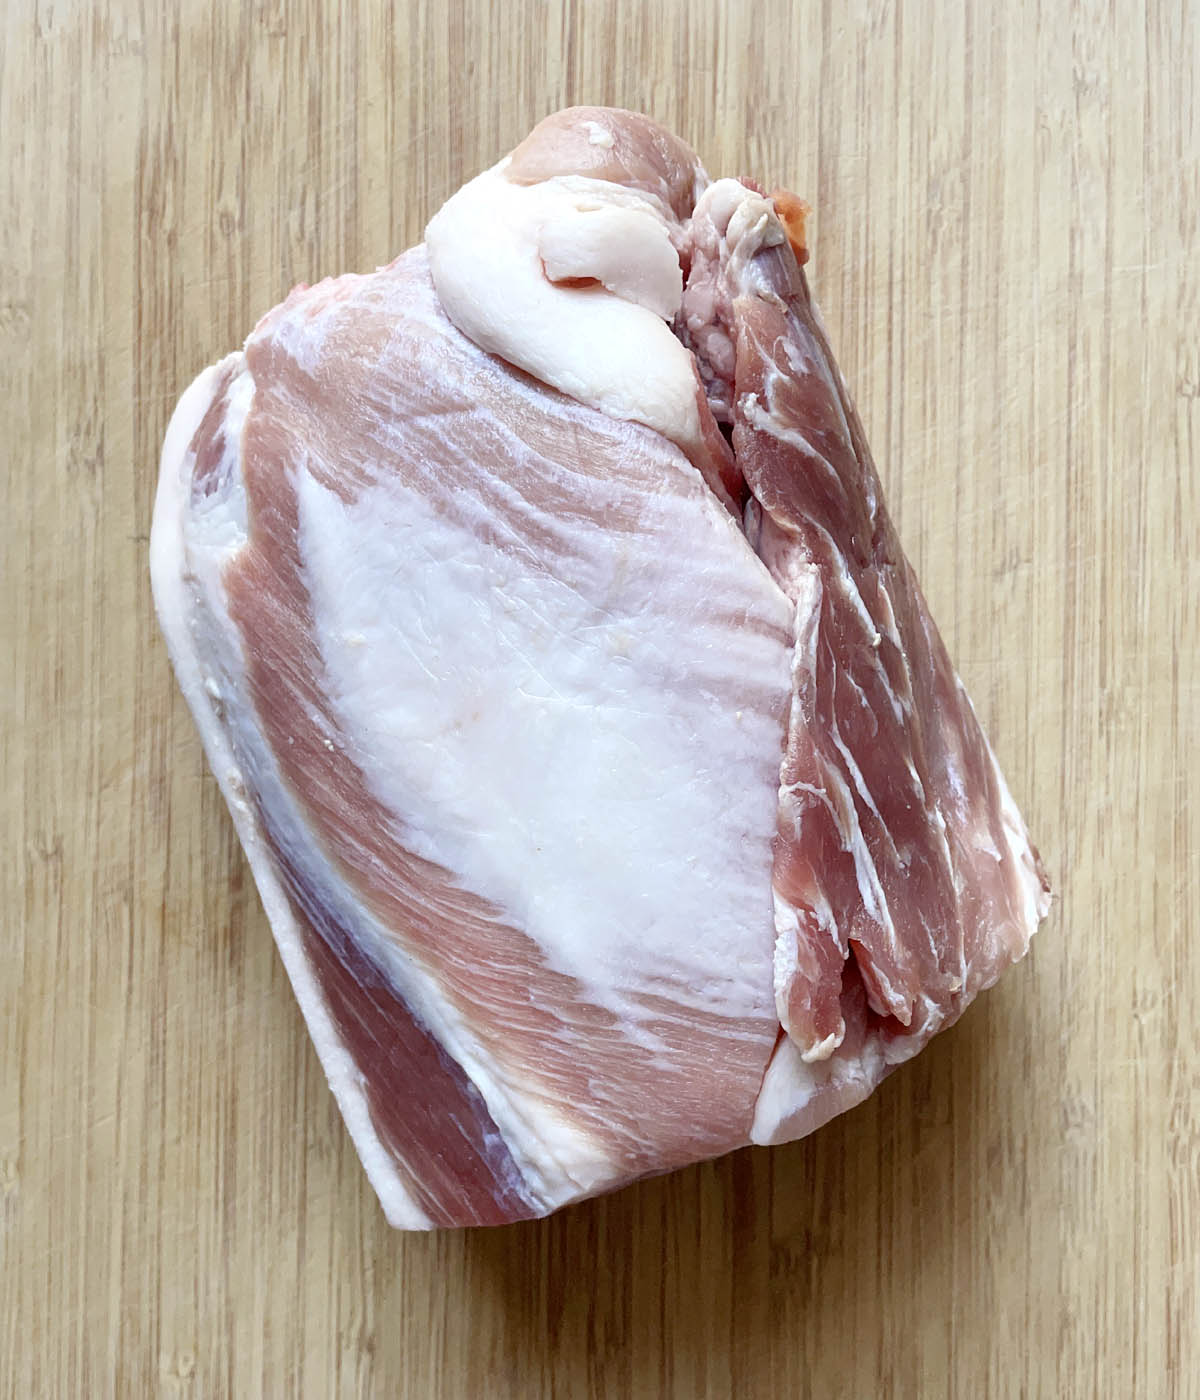 An uncooked pork roast on a wooden cutting board.